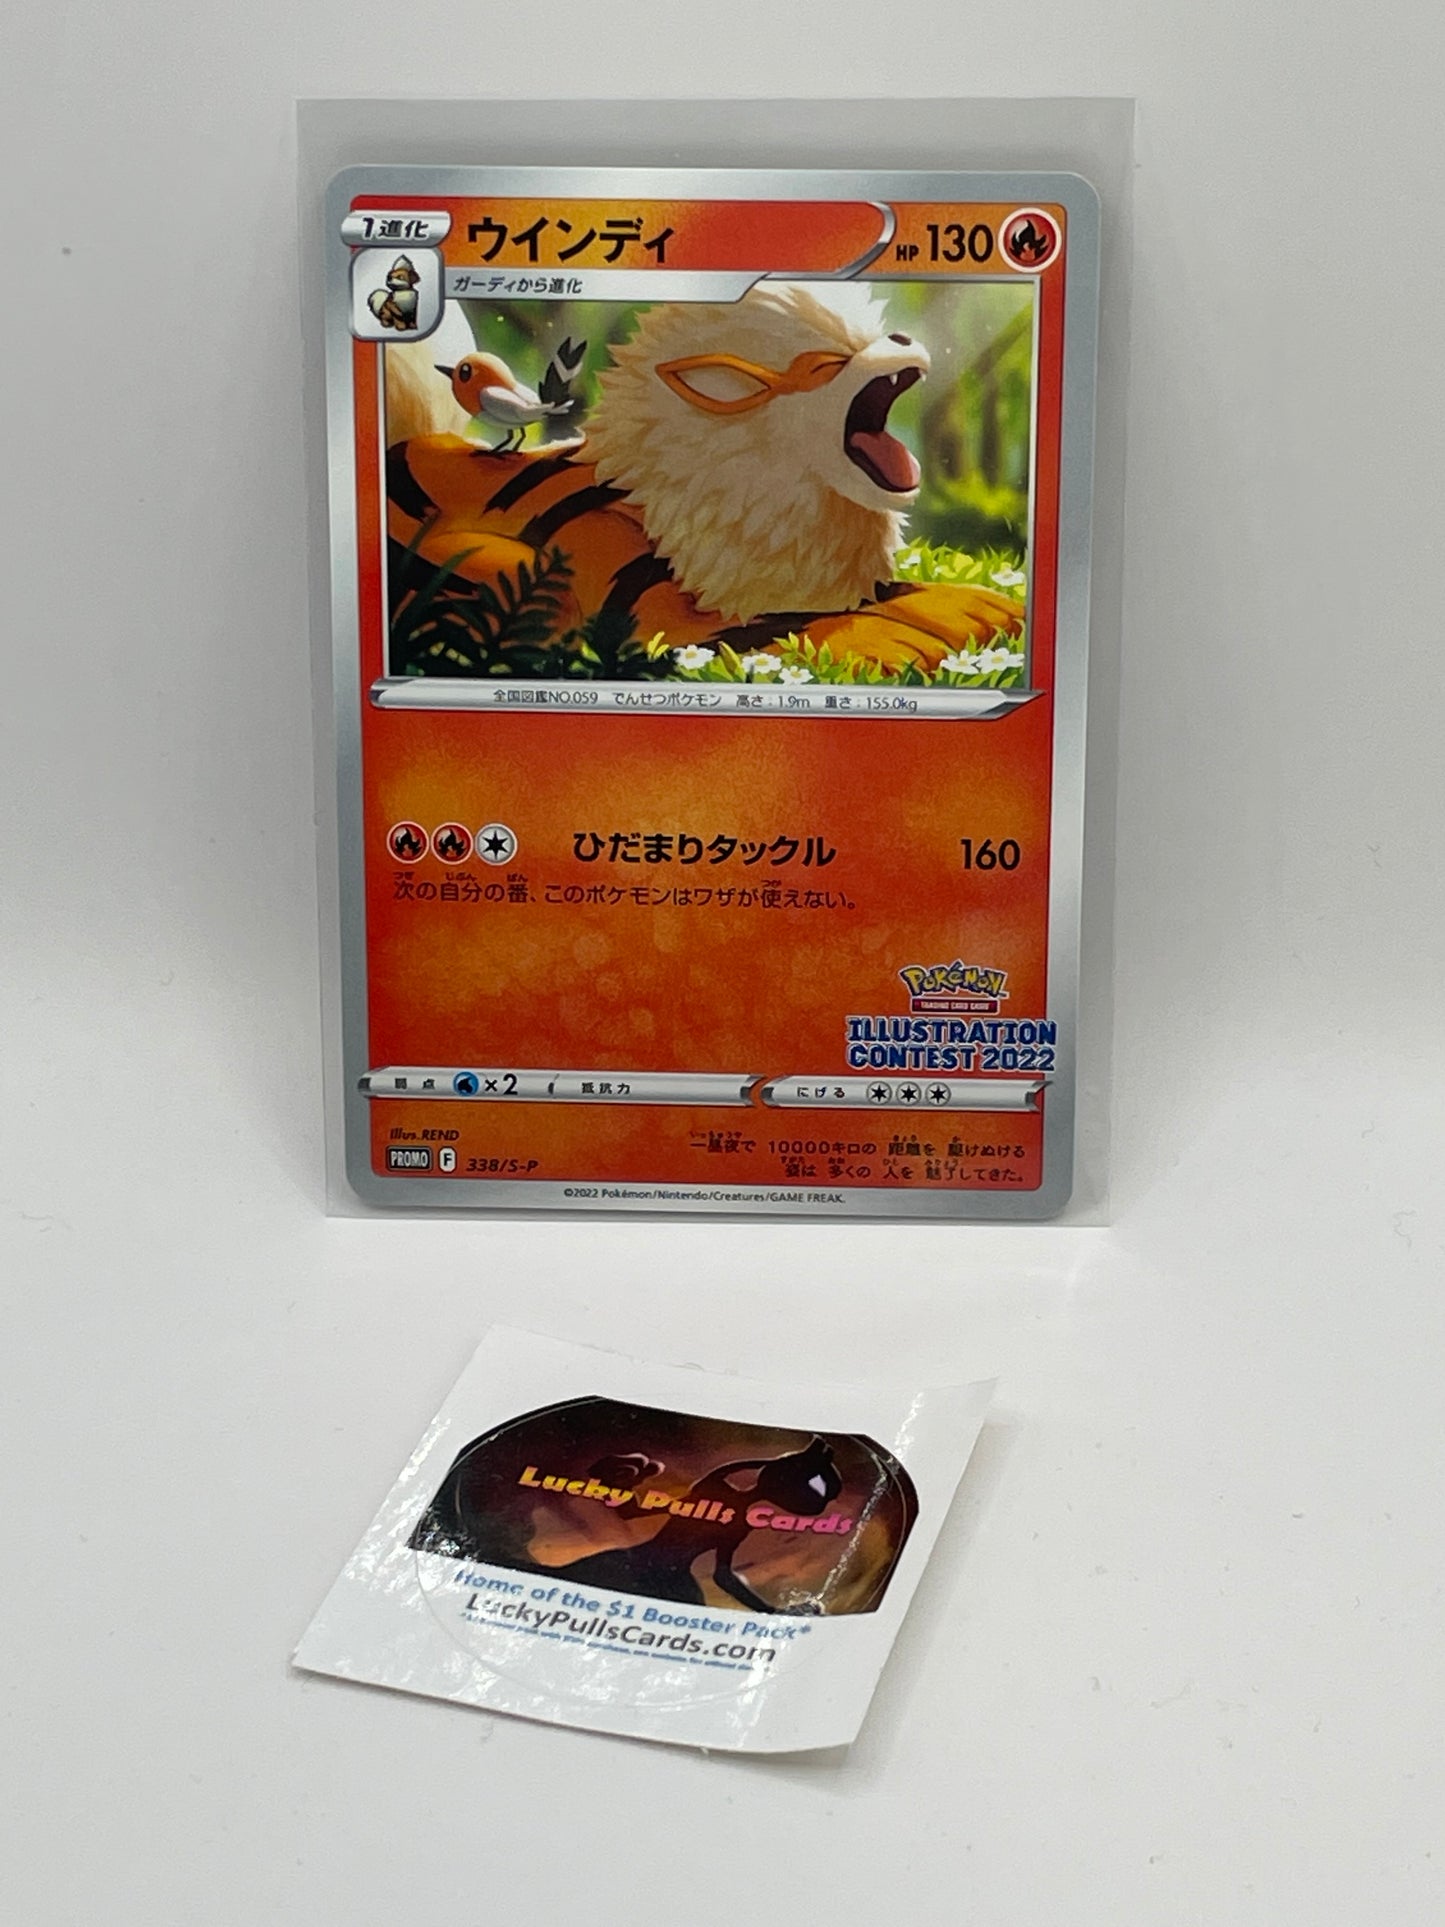 Illustration Contest 2022 Promos - #337/S-P JP (Choose Sealed or individual)